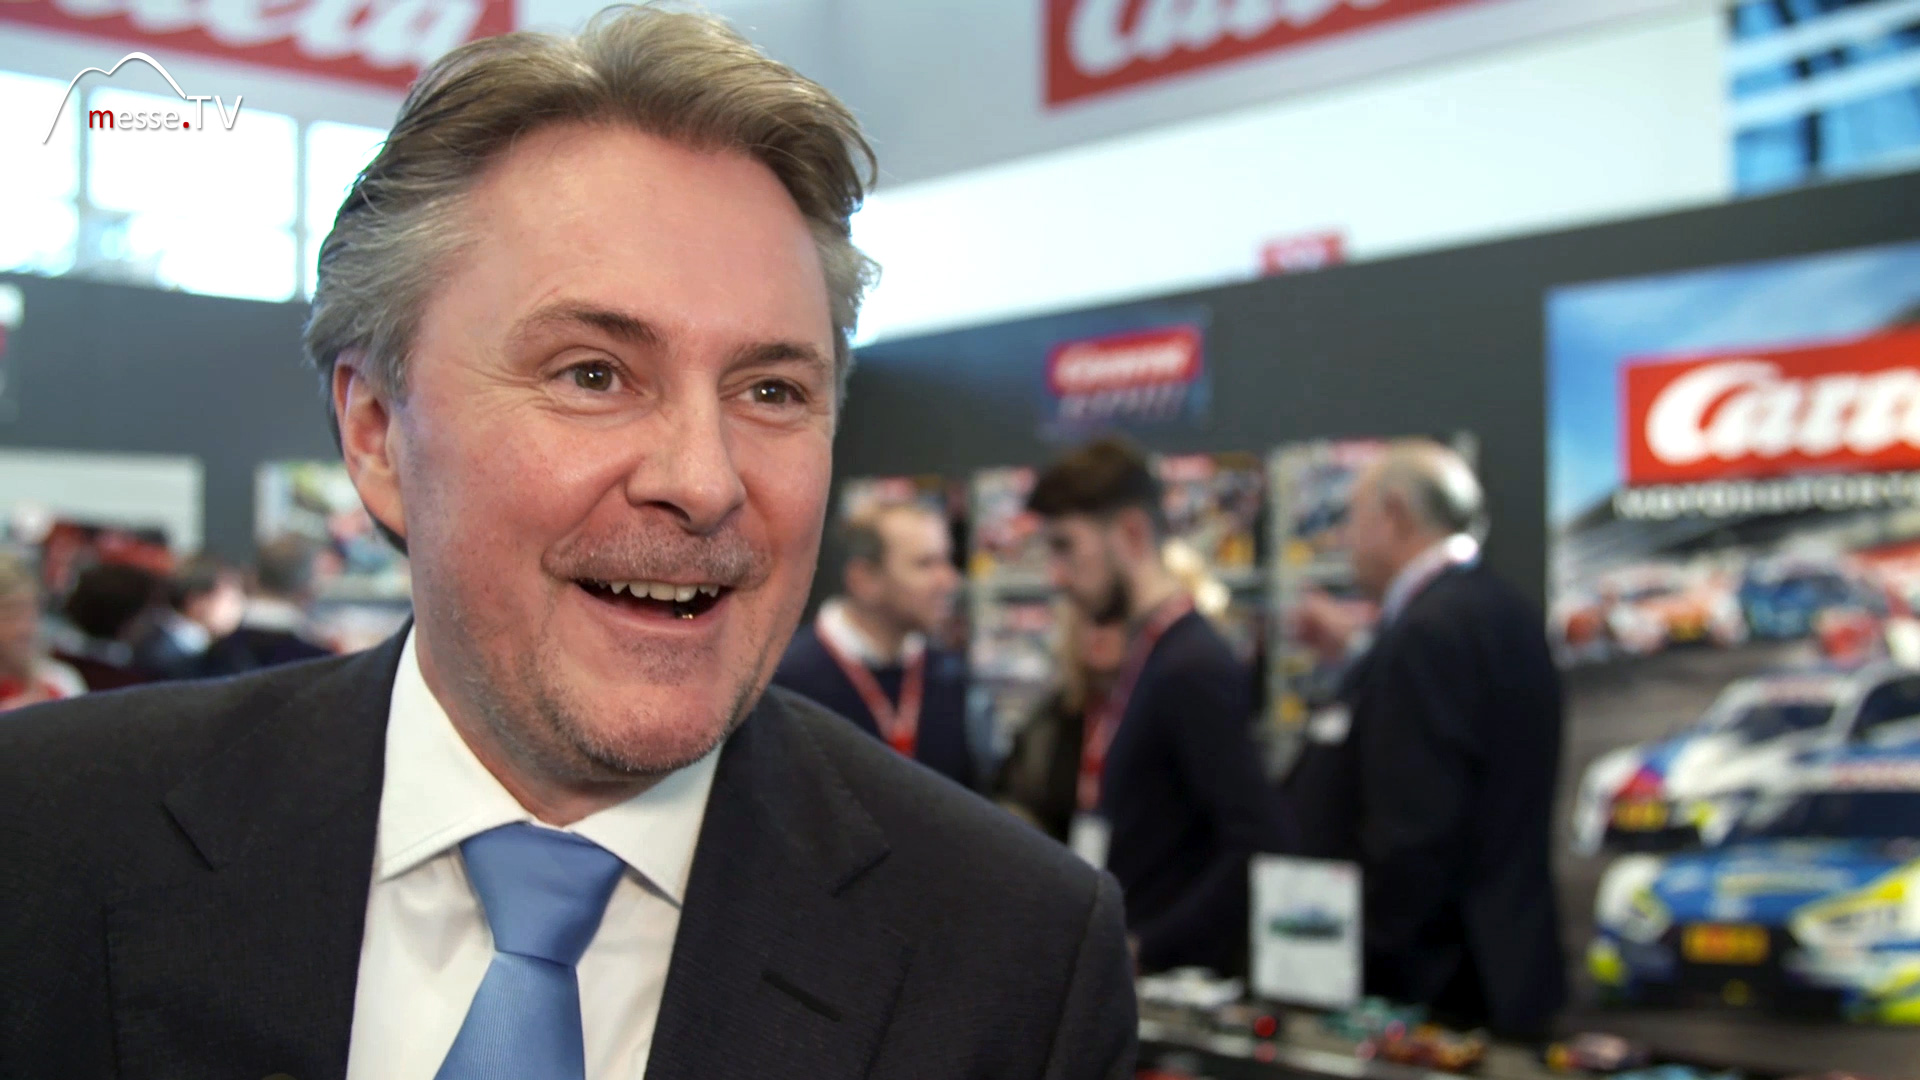 Andreas Stadlbauer Spielwarenmesse 2019 Messestand Carrera